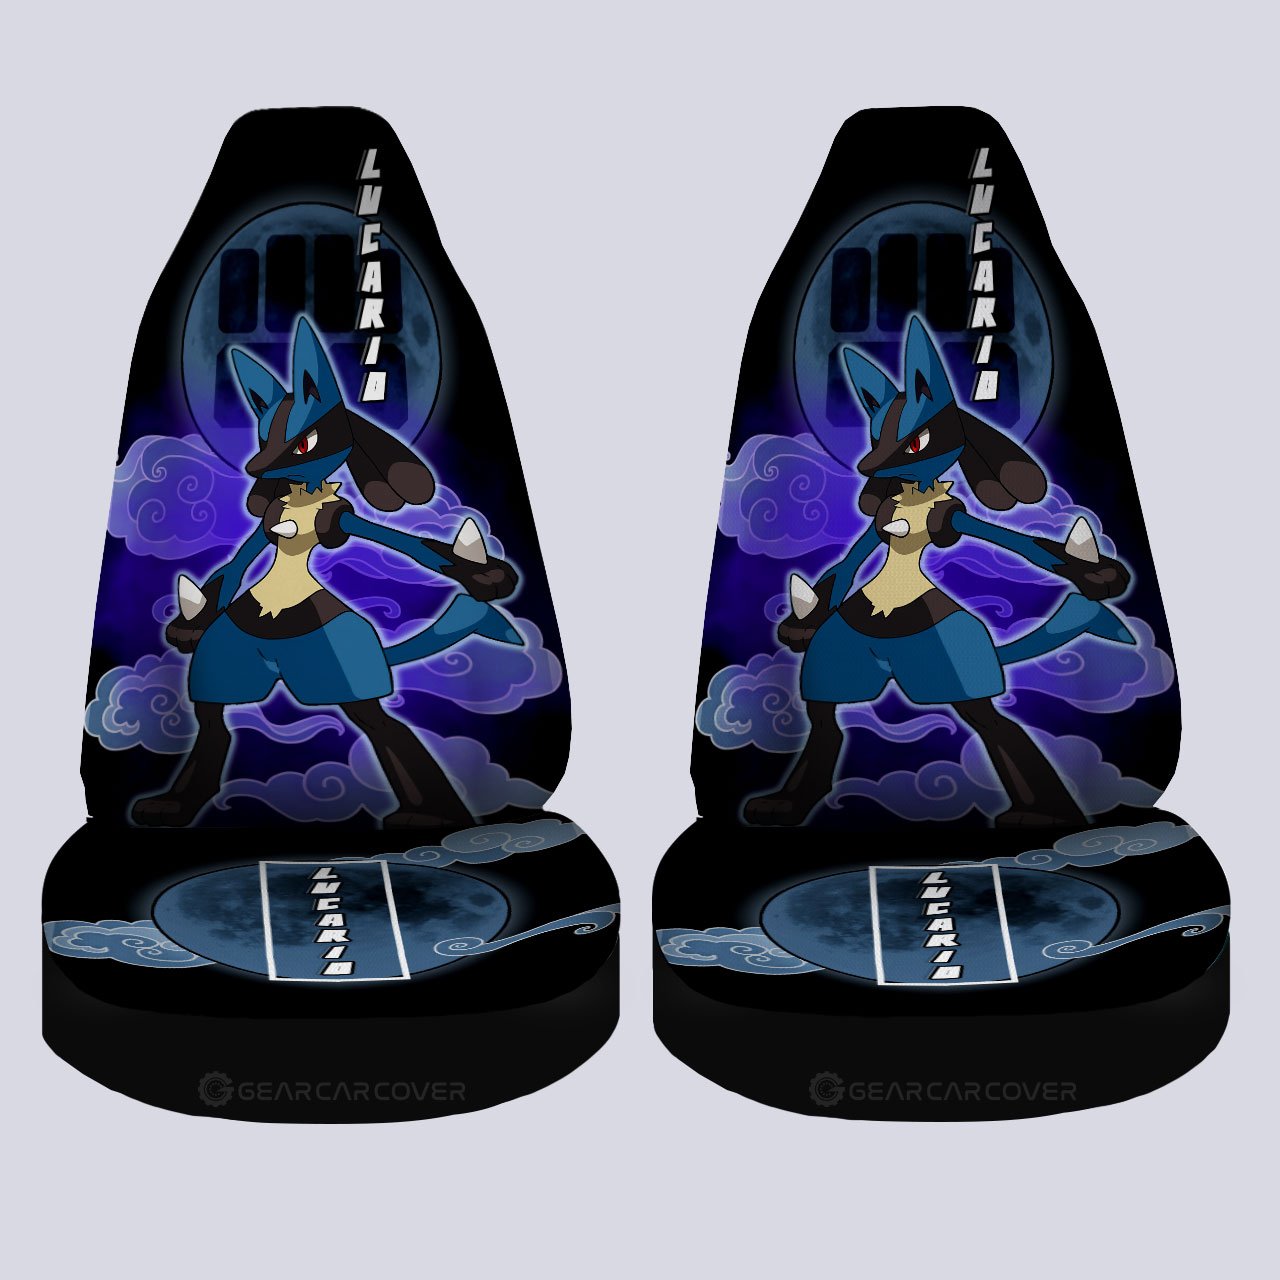 Lucario Car Seat Covers Custom Anime Car Accessories For Anime Fans - Gearcarcover - 4